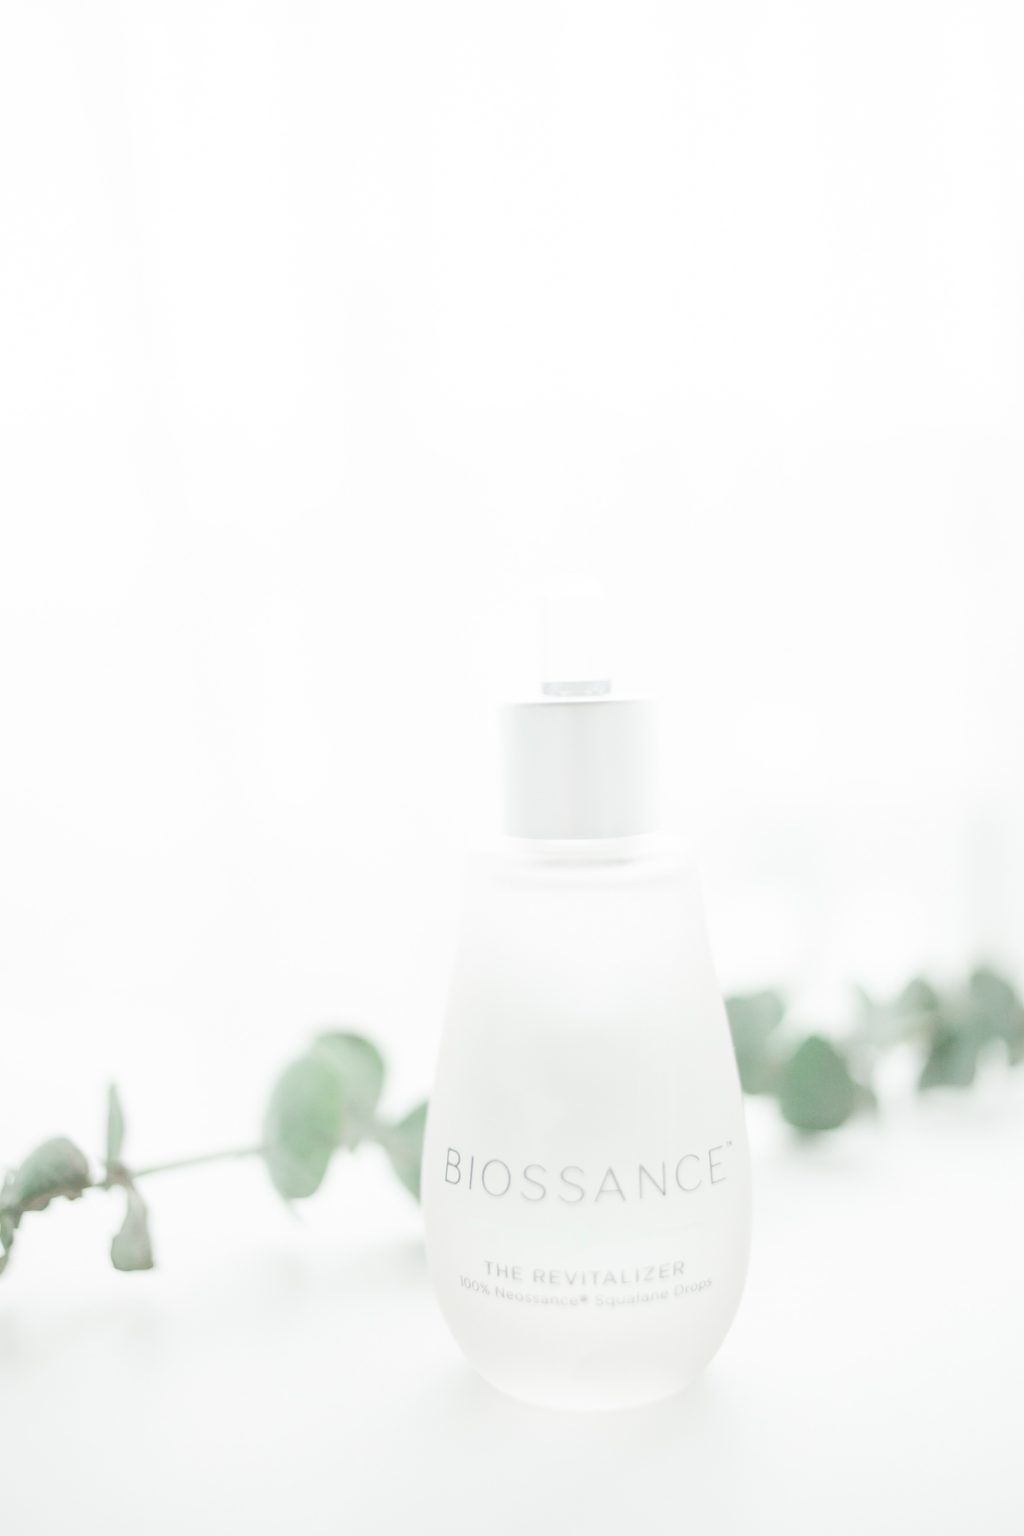 Biossance review, how to keep your skin hydrated, hydrating skin booster, how to hydrate your skin, skin hydrating beauty product